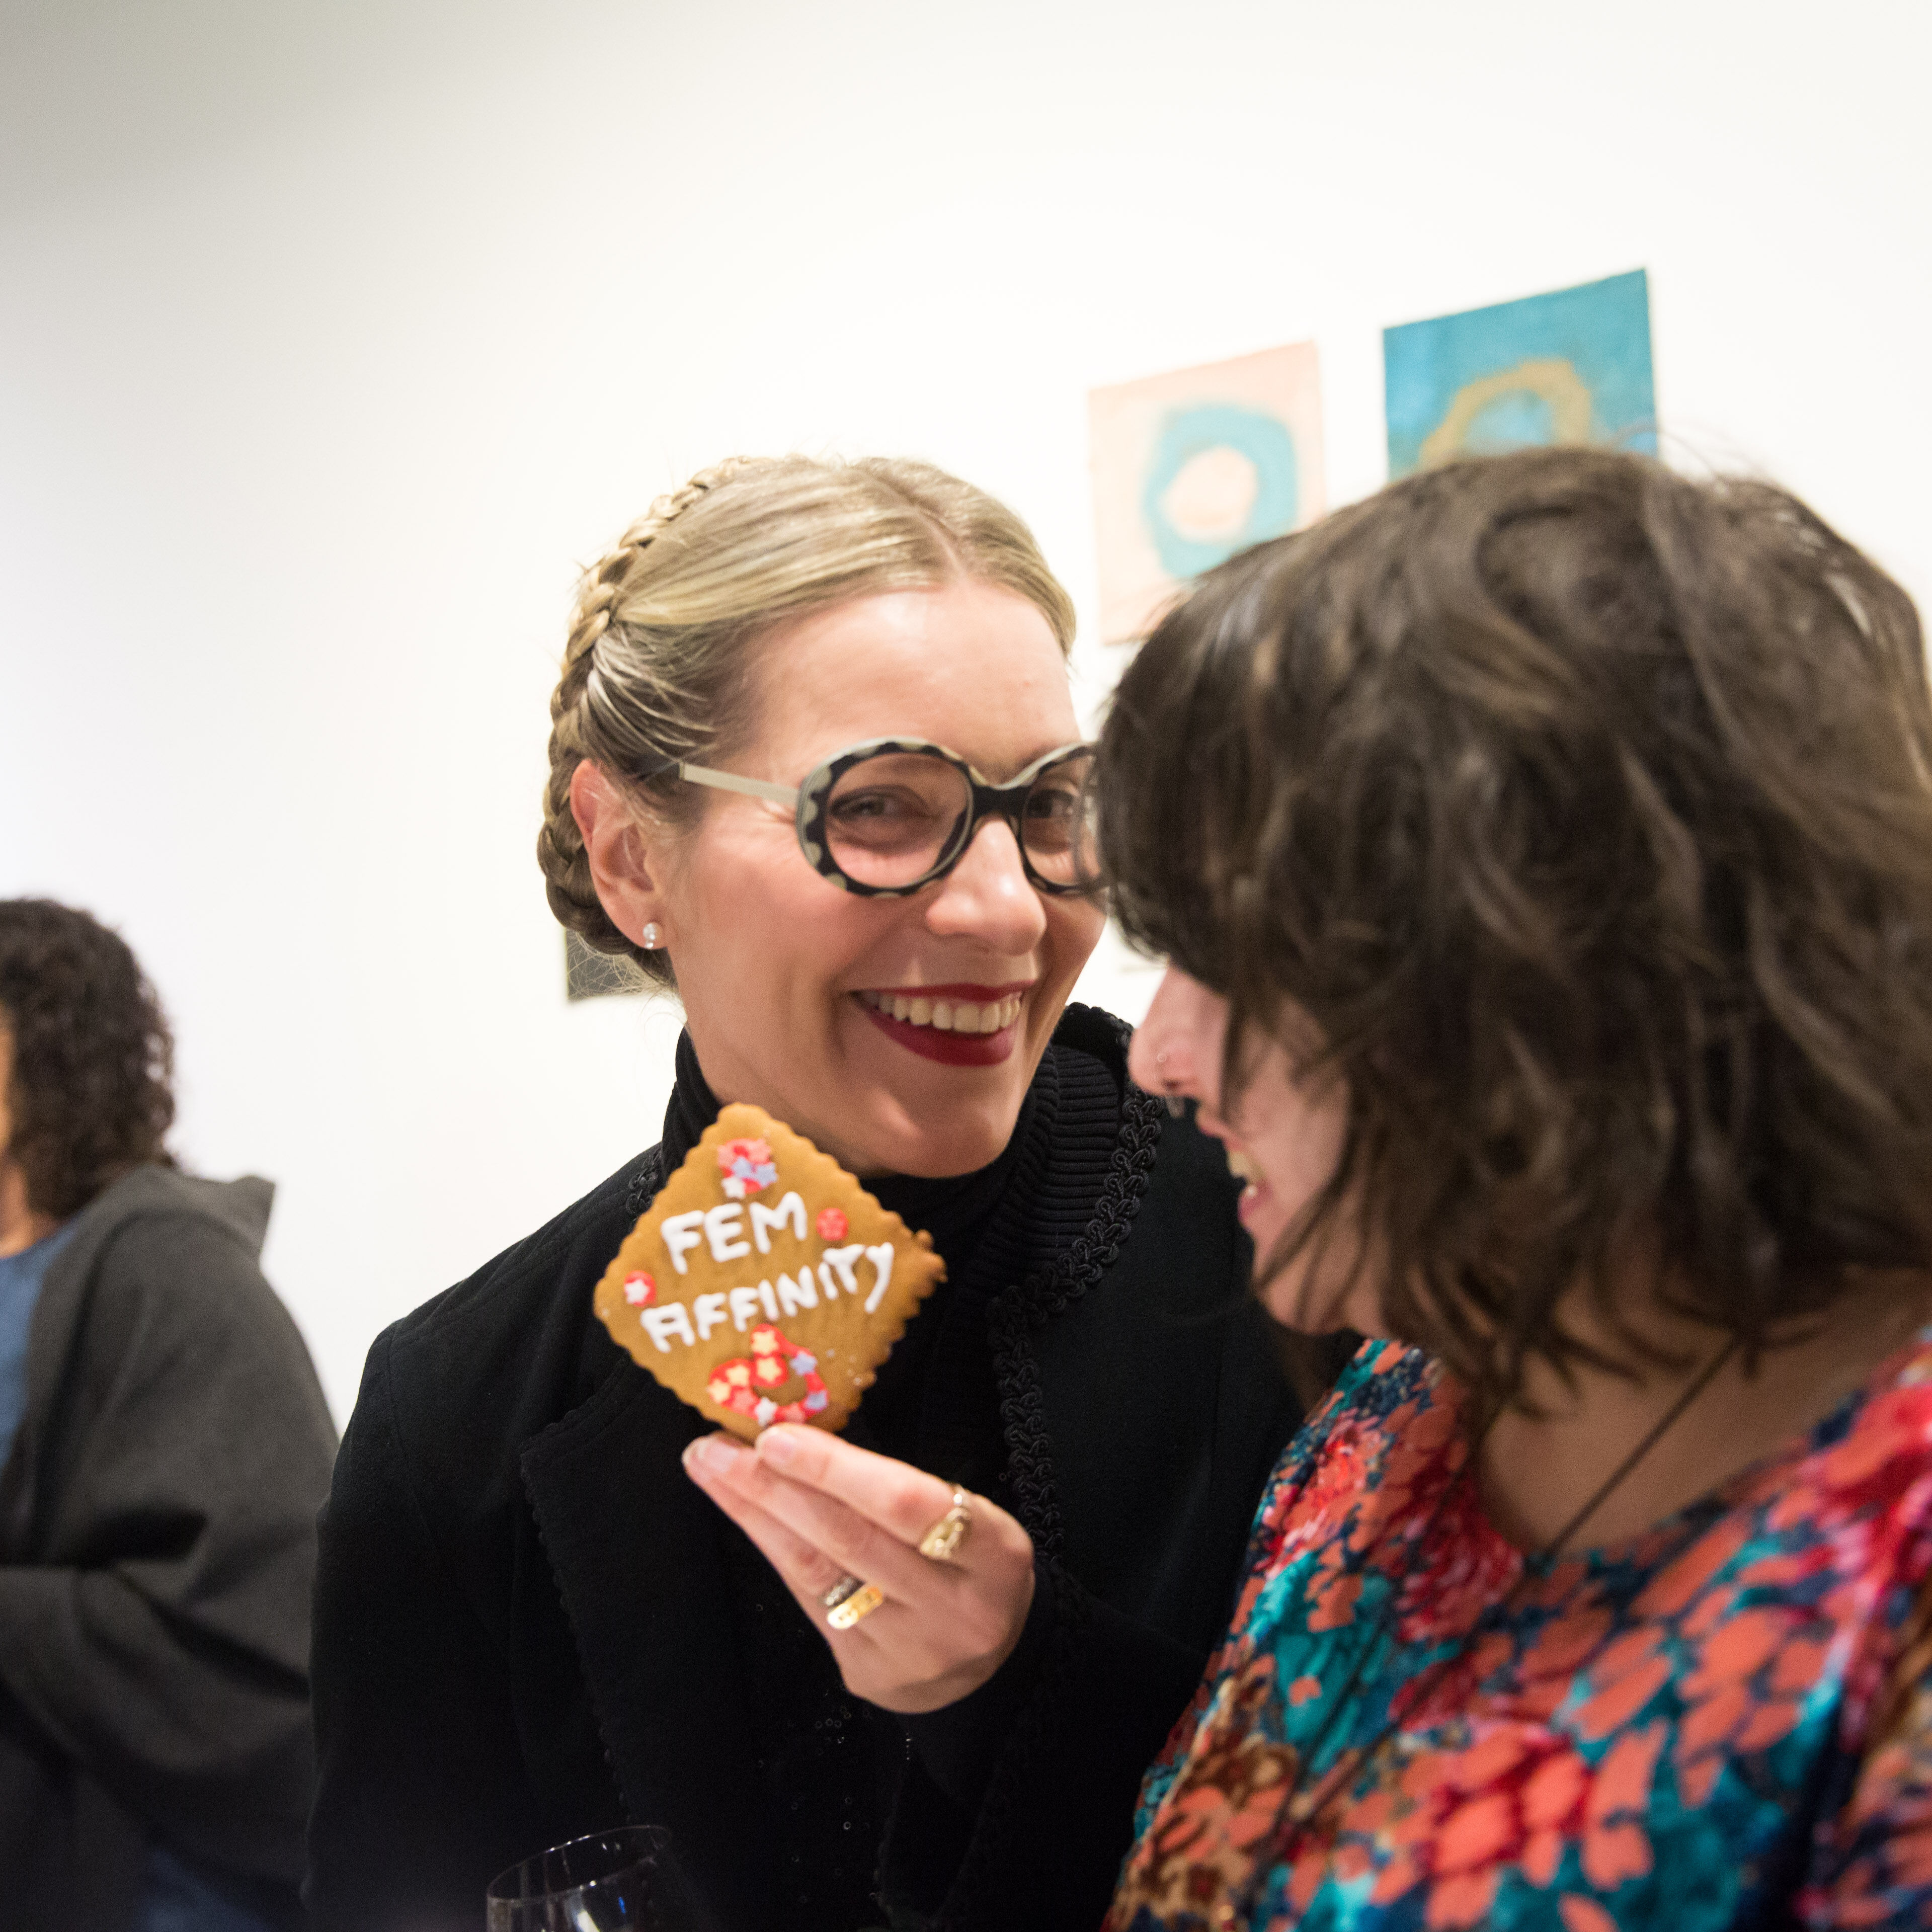 Image Credit: Catherine Bell and Eden Menta at 'FEM-aFFINITY' exhibition opening, Arts Project Australia, 2019. Photograph: Kate Longley